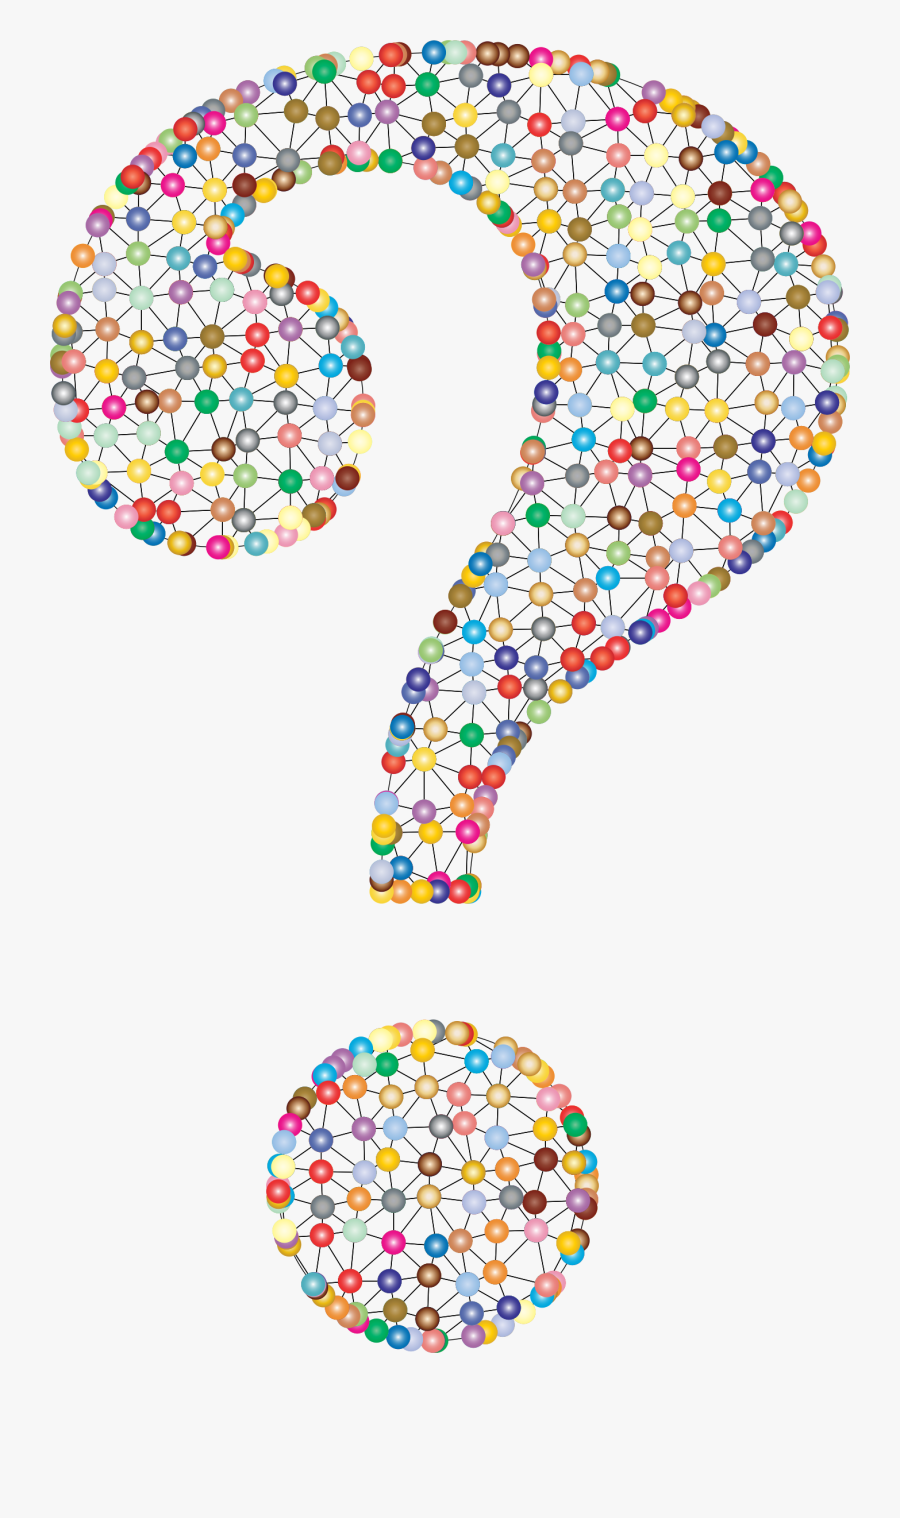 Prismatic Wireframe Big Image - Colorful Question Mark Png, Transparent Clipart